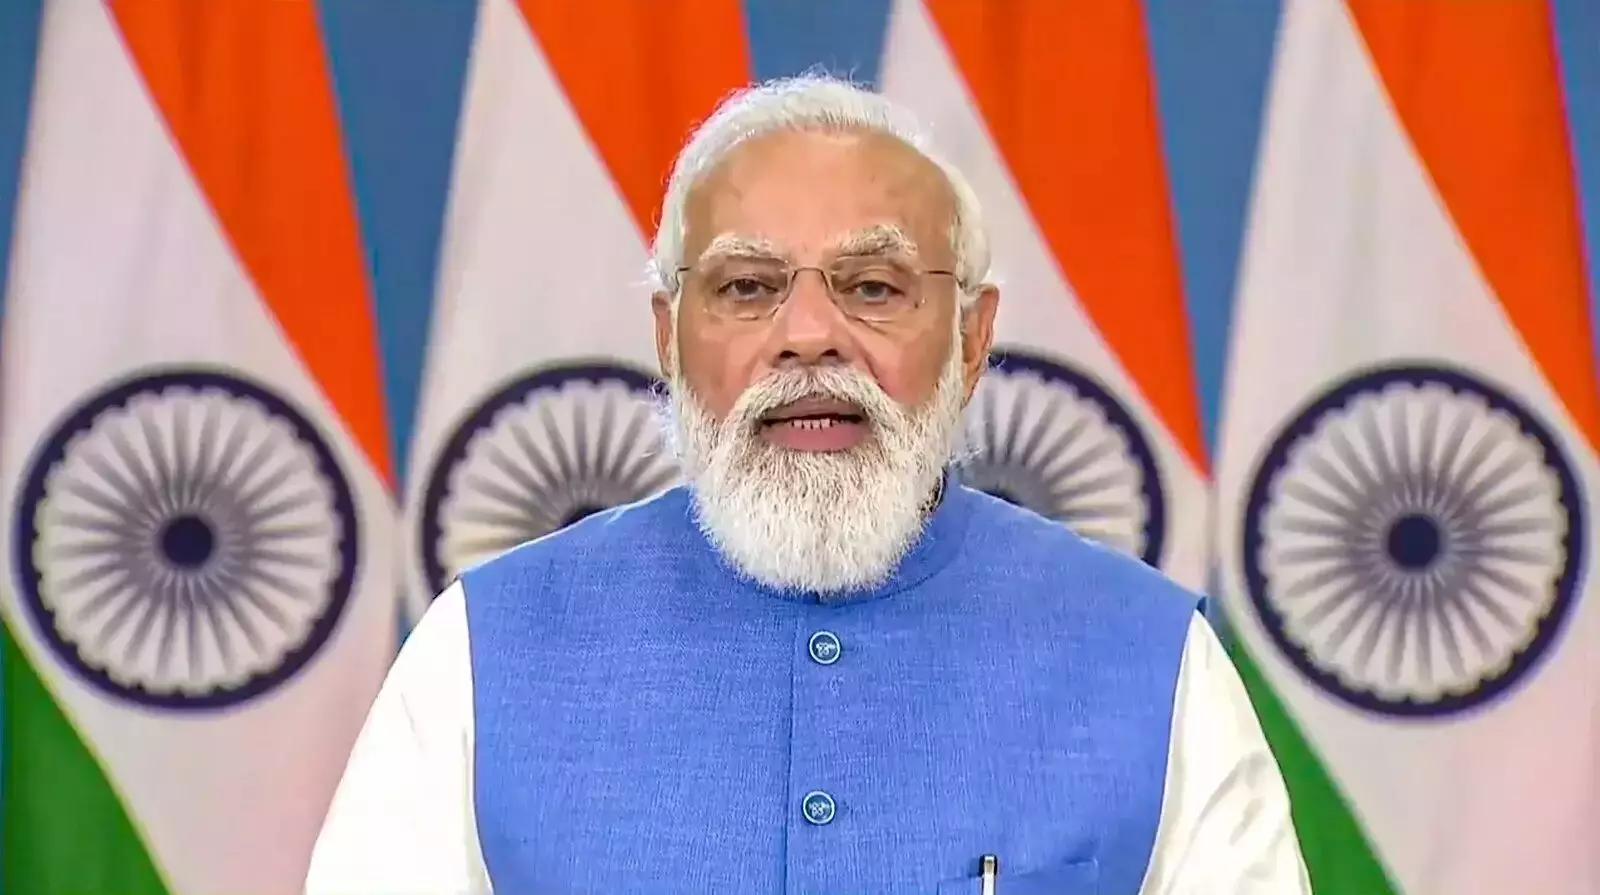 Prime Minister Narendra Modi virtually launched Ayushman Bharat Digital Mission today